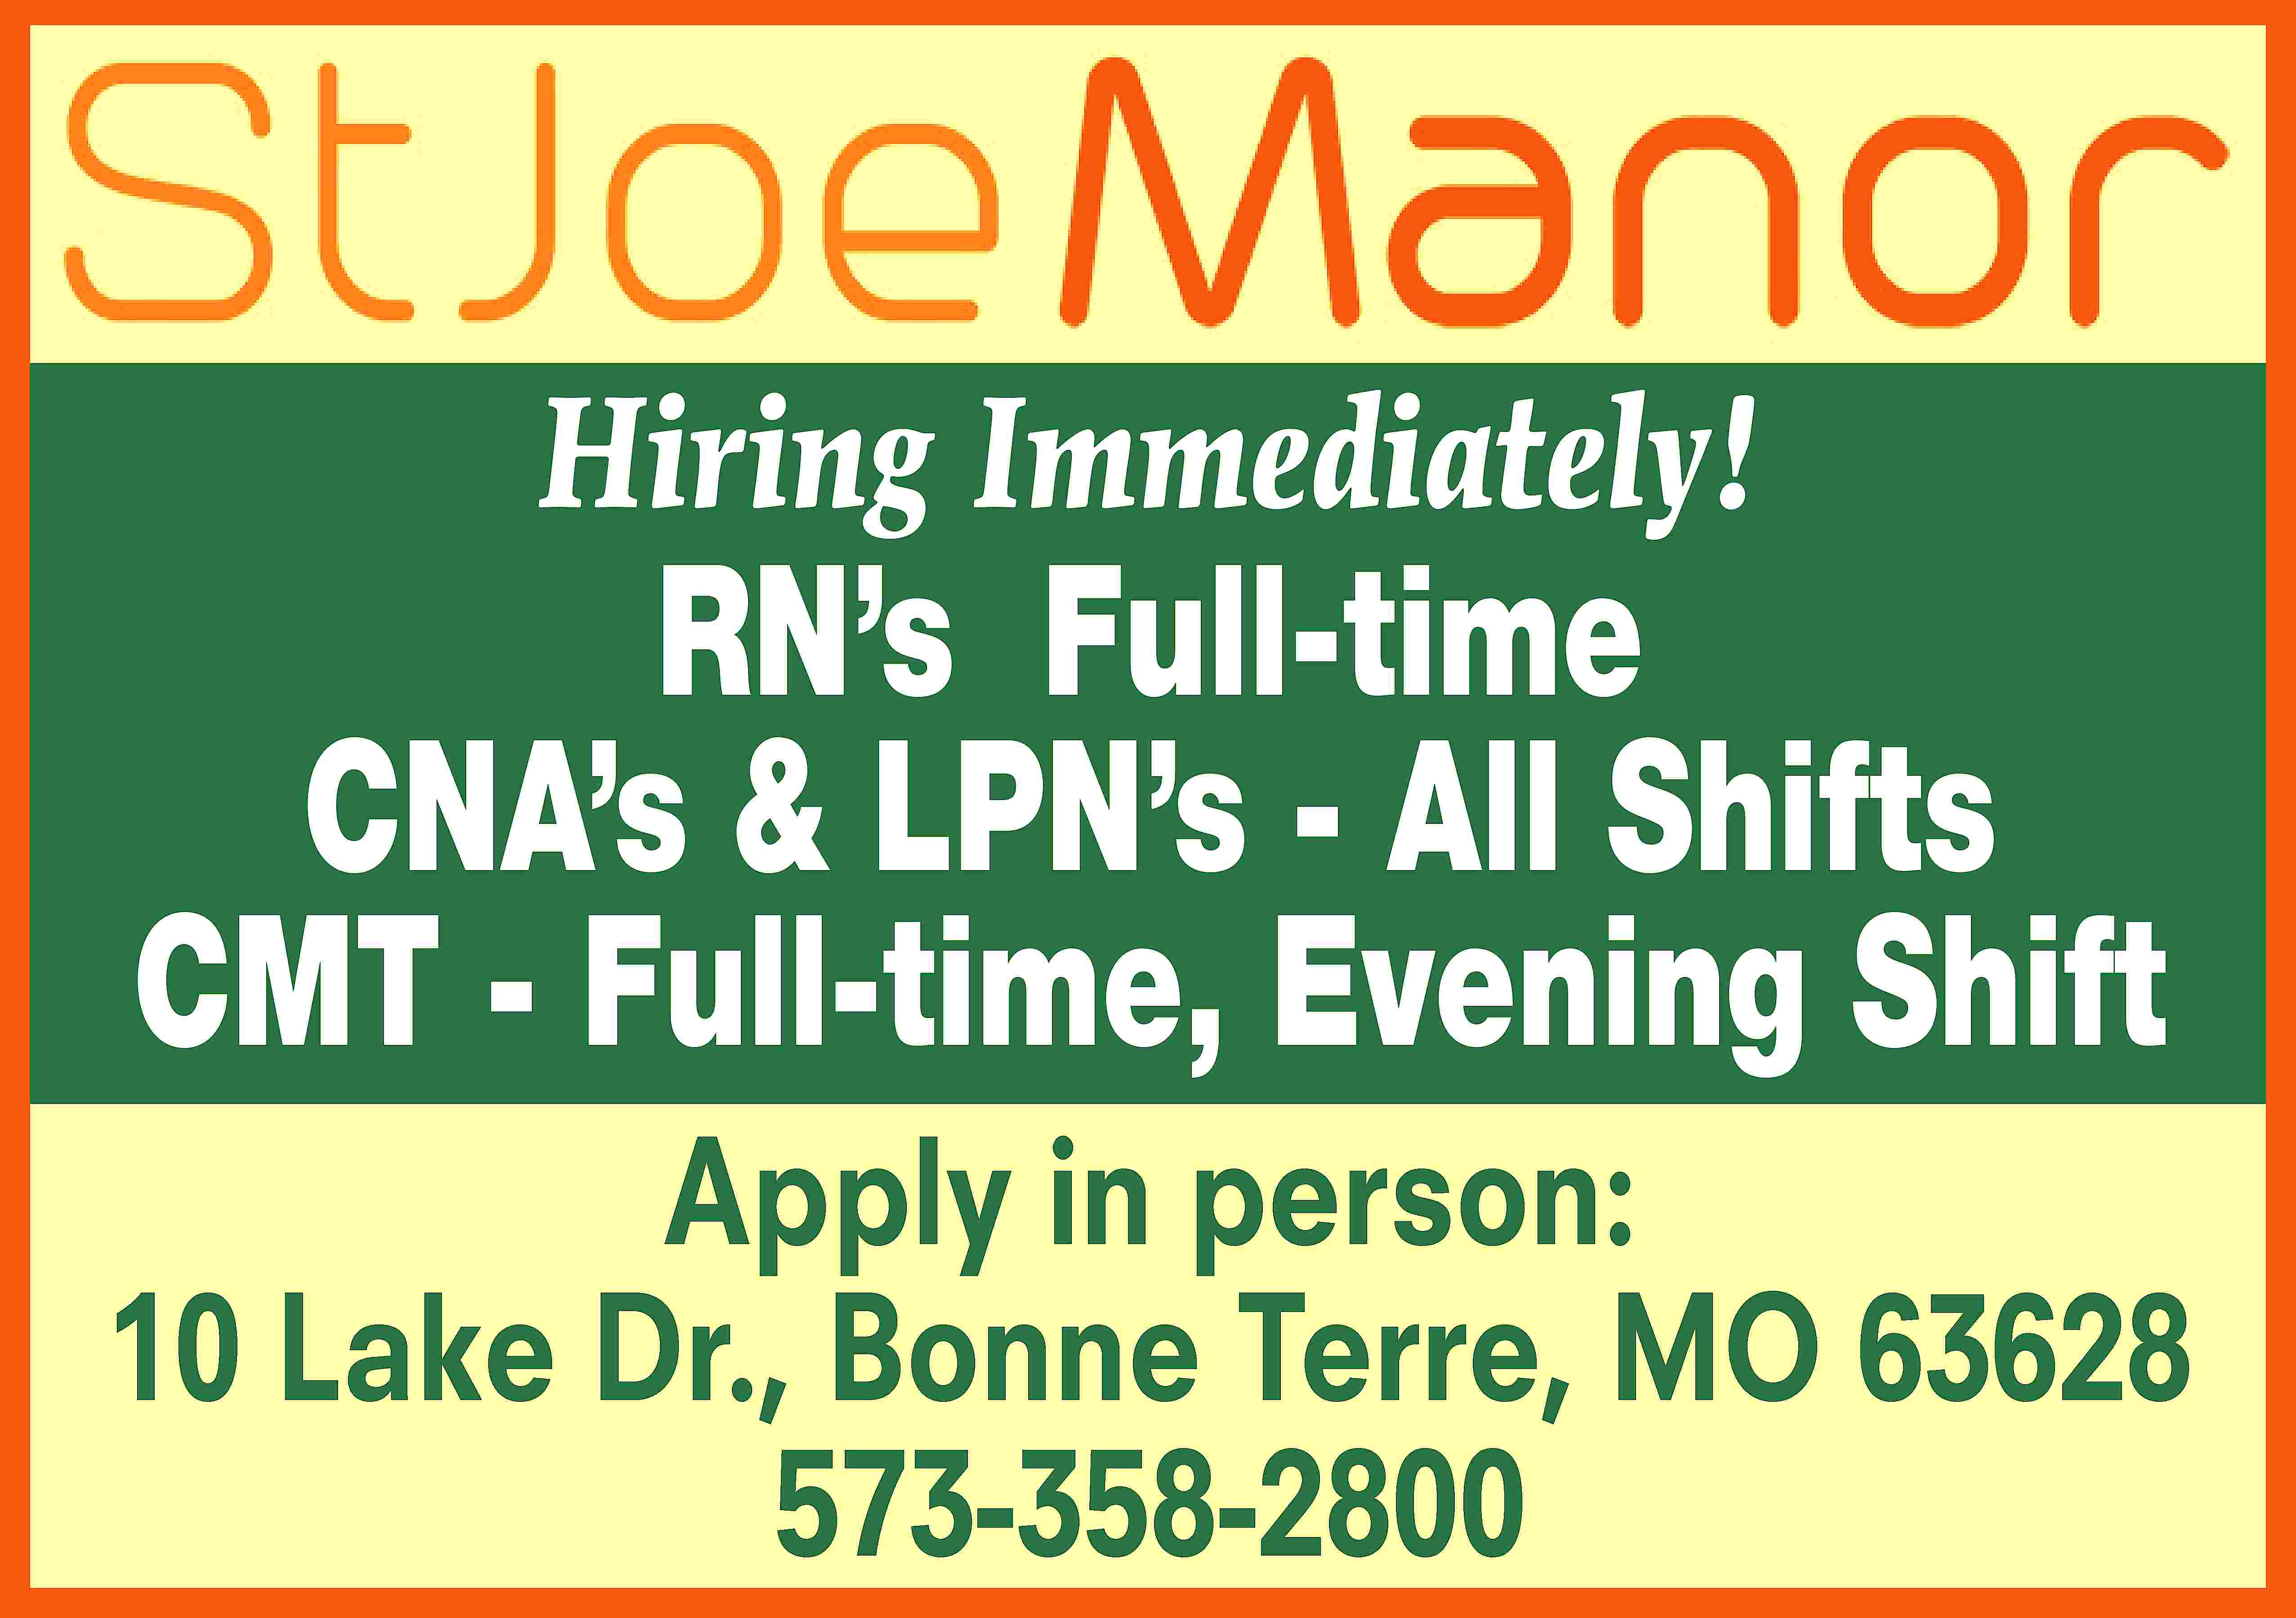 Hiring Immediately! RN’s Full-time CNA’s  Hiring Immediately! RN’s Full-time CNA’s & LPN’s - All Shifts CMT - Full-time, Evening Shift Apply in person: 10 Lake Dr., Bonne Terre, MO 63628 573-358-2800